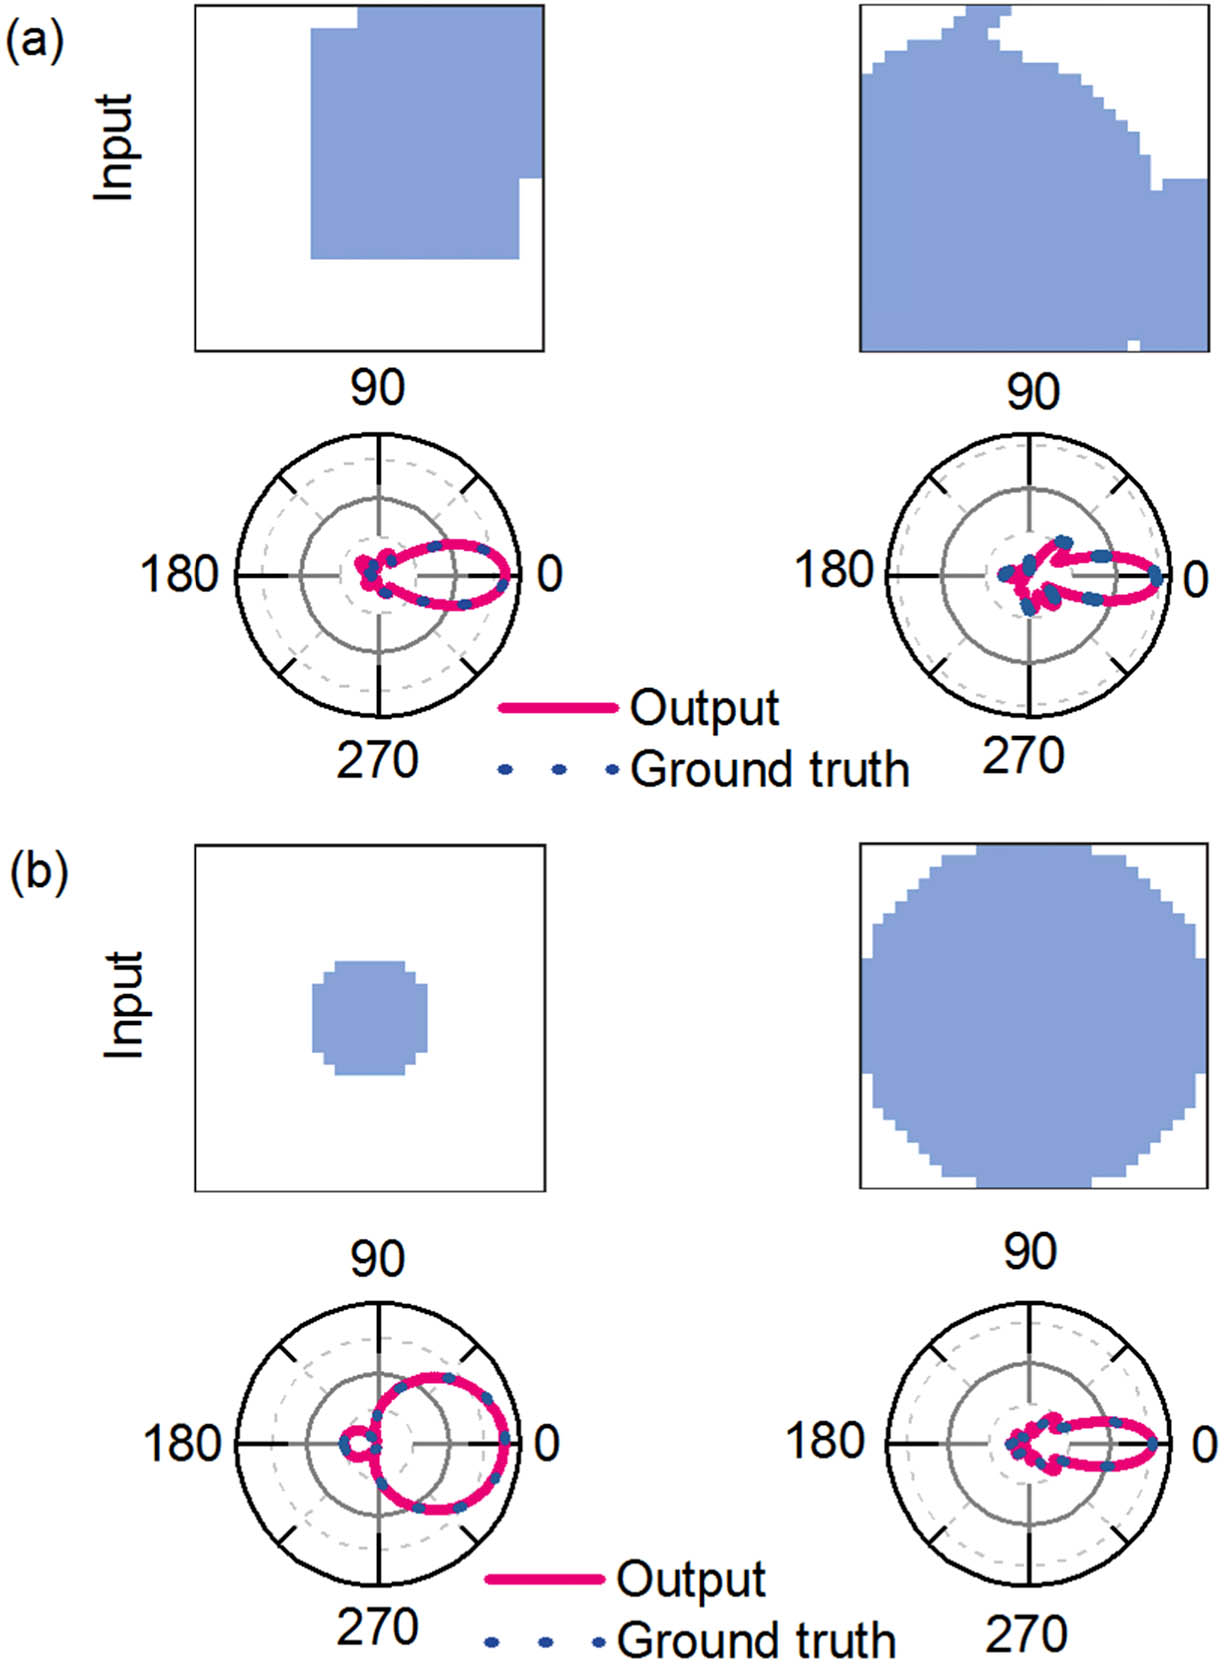 Examples of results from our method on: (a) random structures from the test set; and (b) typical shapes with different sizes, compared to the ground truth.